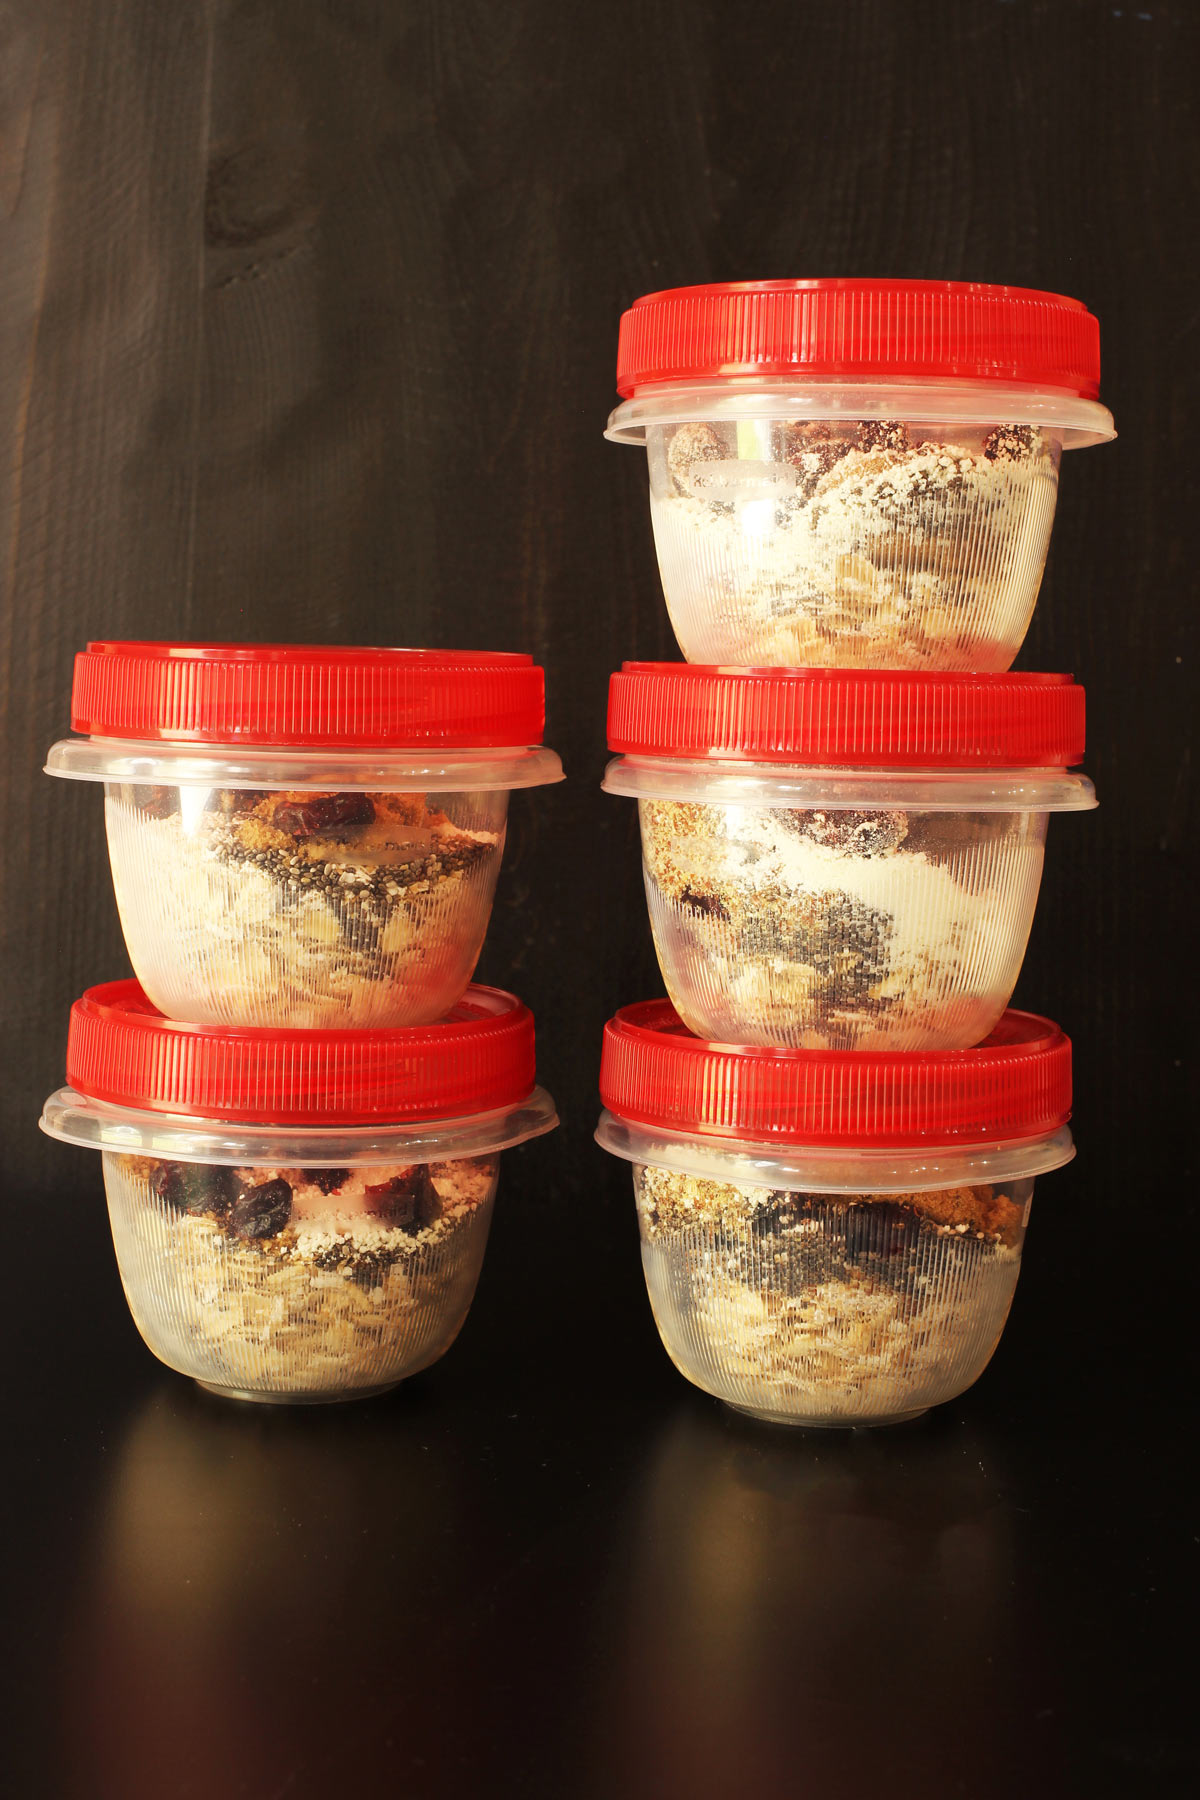 stacks of homemade instant oatmeal cups.